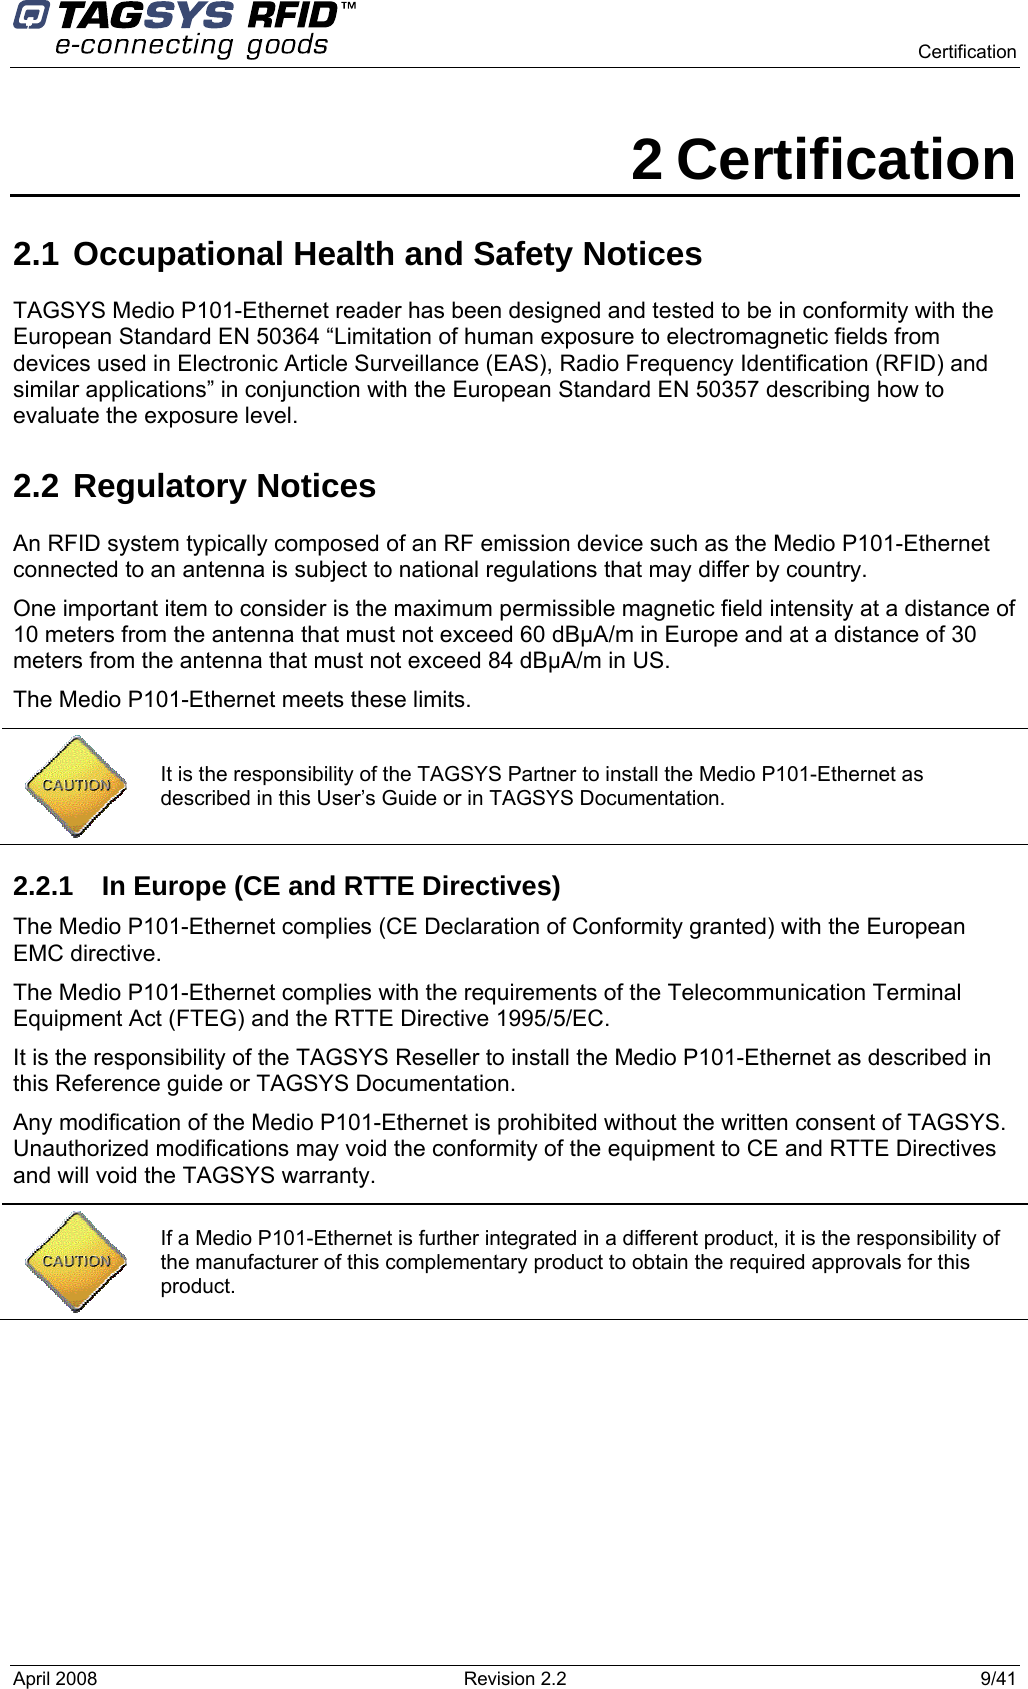    Certification  April 2008  Revision 2.2  9/41 2 Certification 2.1 Occupational Health and Safety Notices  TAGSYS Medio P101-Ethernet reader has been designed and tested to be in conformity with the European Standard EN 50364 “Limitation of human exposure to electromagnetic fields from devices used in Electronic Article Surveillance (EAS), Radio Frequency Identification (RFID) and similar applications” in conjunction with the European Standard EN 50357 describing how to evaluate the exposure level. 2.2 Regulatory Notices An RFID system typically composed of an RF emission device such as the Medio P101-Ethernet connected to an antenna is subject to national regulations that may differ by country. One important item to consider is the maximum permissible magnetic field intensity at a distance of 10 meters from the antenna that must not exceed 60 dBµA/m in Europe and at a distance of 30 meters from the antenna that must not exceed 84 dBµA/m in US. The Medio P101-Ethernet meets these limits.  2.2.1  In Europe (CE and RTTE Directives)  The Medio P101-Ethernet complies (CE Declaration of Conformity granted) with the European EMC directive. The Medio P101-Ethernet complies with the requirements of the Telecommunication Terminal Equipment Act (FTEG) and the RTTE Directive 1995/5/EC. It is the responsibility of the TAGSYS Reseller to install the Medio P101-Ethernet as described in this Reference guide or TAGSYS Documentation. Any modification of the Medio P101-Ethernet is prohibited without the written consent of TAGSYS. Unauthorized modifications may void the conformity of the equipment to CE and RTTE Directives and will void the TAGSYS warranty.    It is the responsibility of the TAGSYS Partner to install the Medio P101-Ethernet as described in this User’s Guide or in TAGSYS Documentation.  If a Medio P101-Ethernet is further integrated in a different product, it is the responsibility of the manufacturer of this complementary product to obtain the required approvals for this product. 